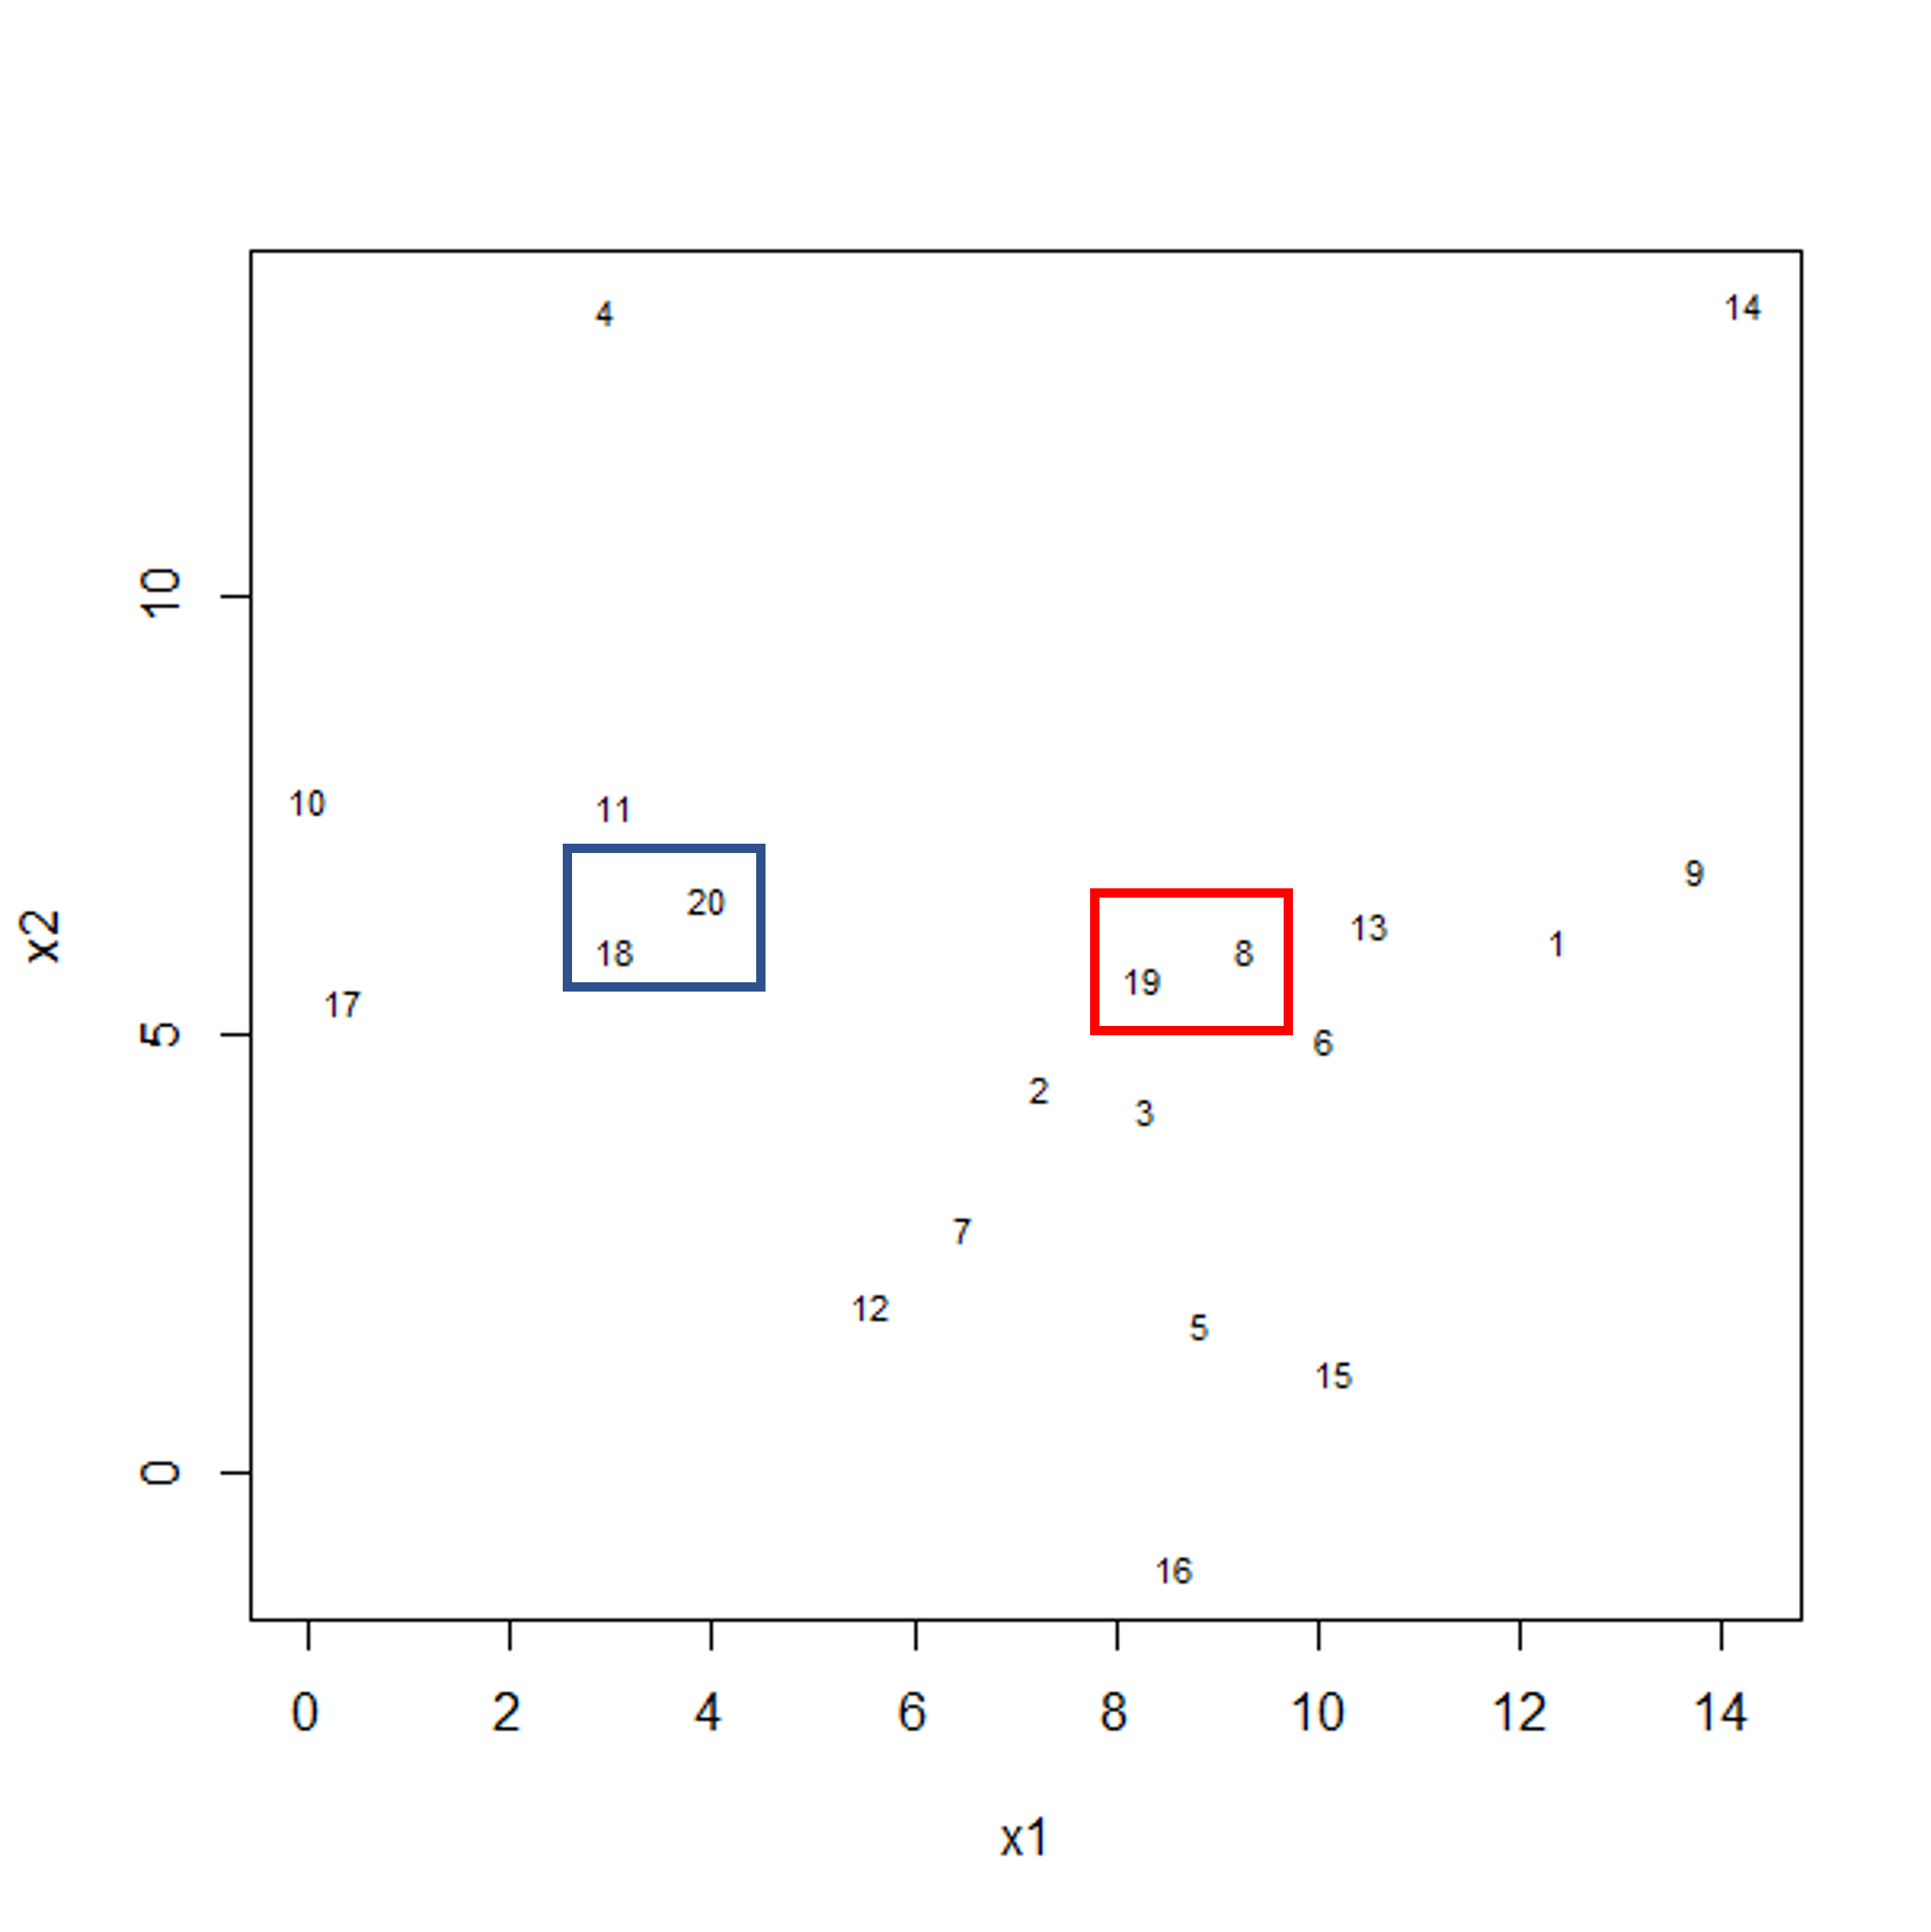 Scatter plot of observations x2 versus x1. Two clusters of pairs of observations are shown by blue and red boxes, each grouping two observations that are close in their x and y distance.